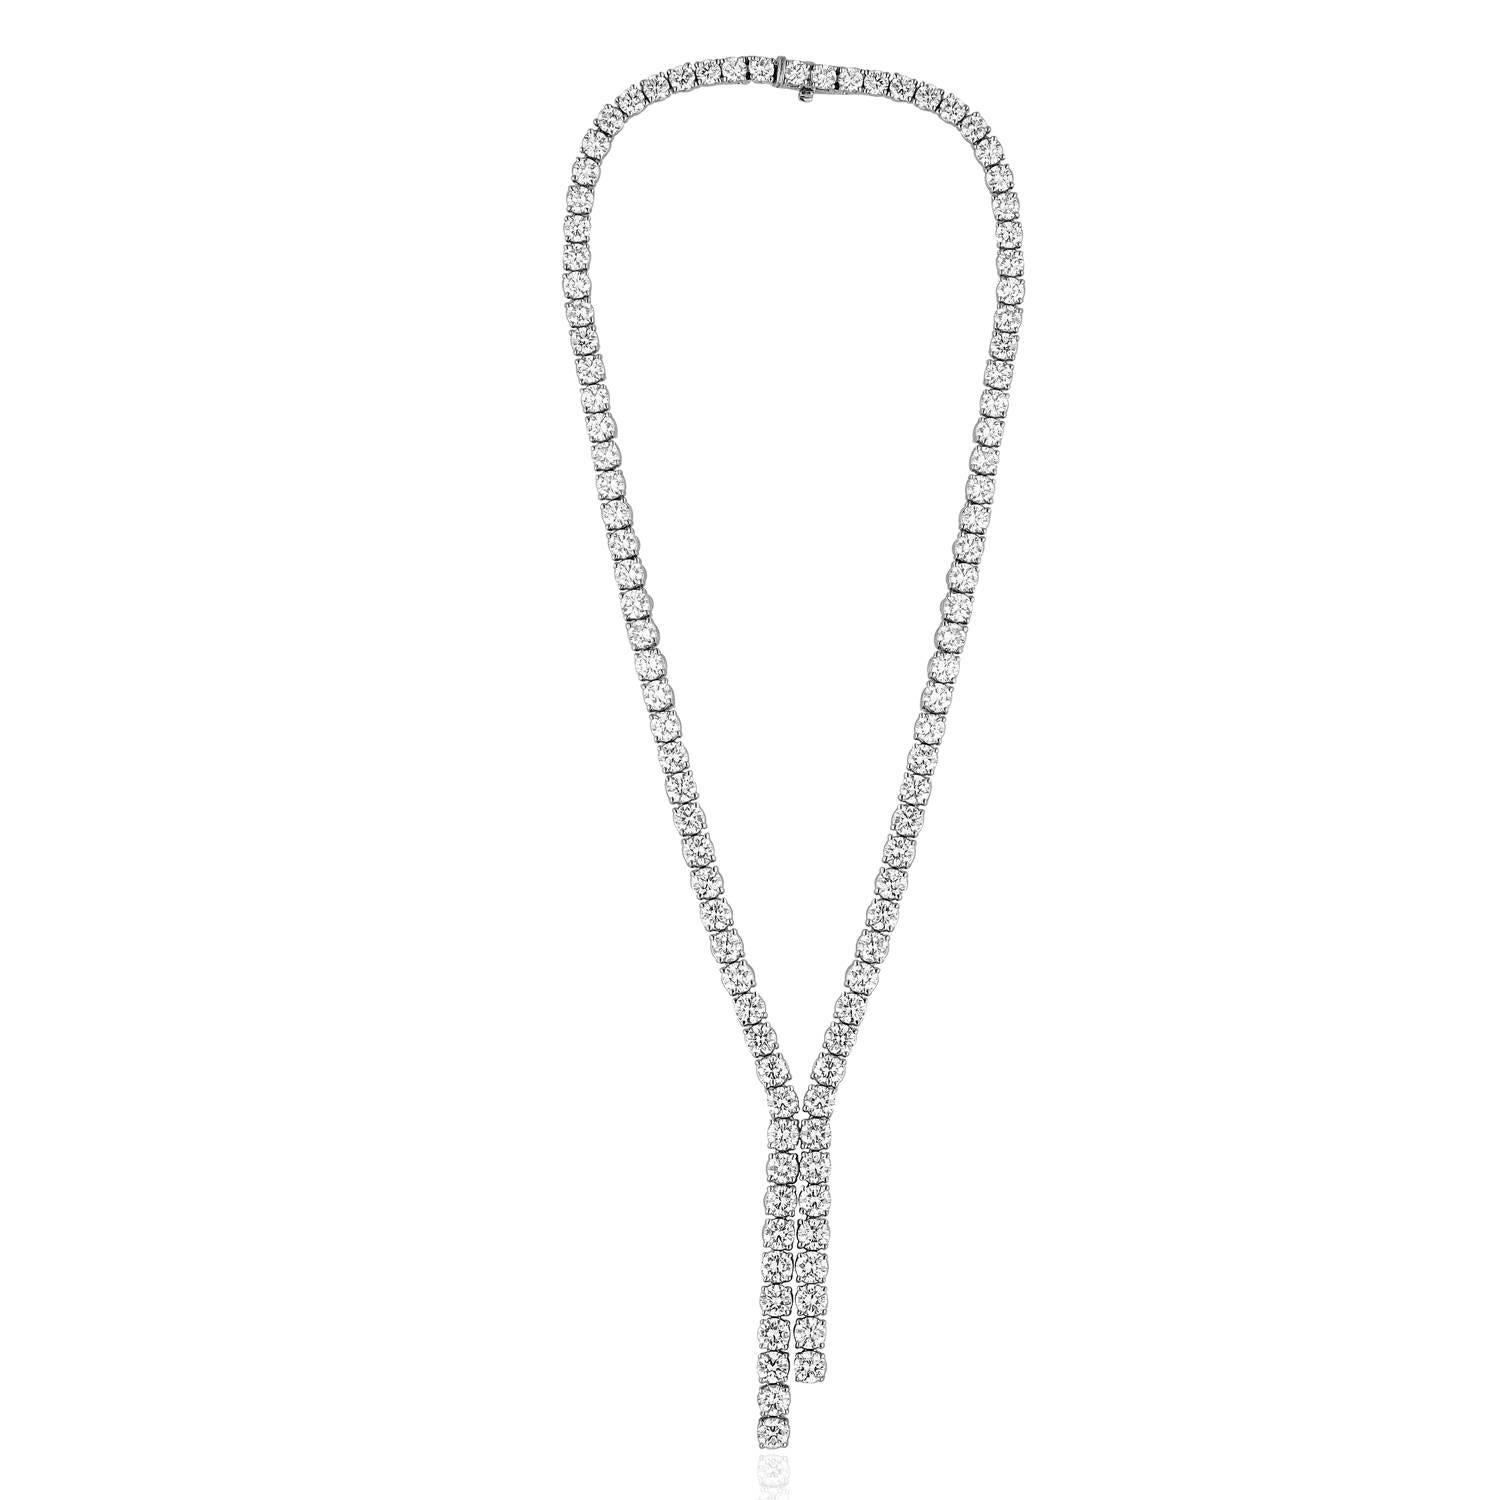 Beautiful Tennis Necklace.
The necklace is 18K White Gold.
There are 28.00Ct In Diamonds E/F VS.
The necklace weighs 41.3 grams.
The necklace is 14.5